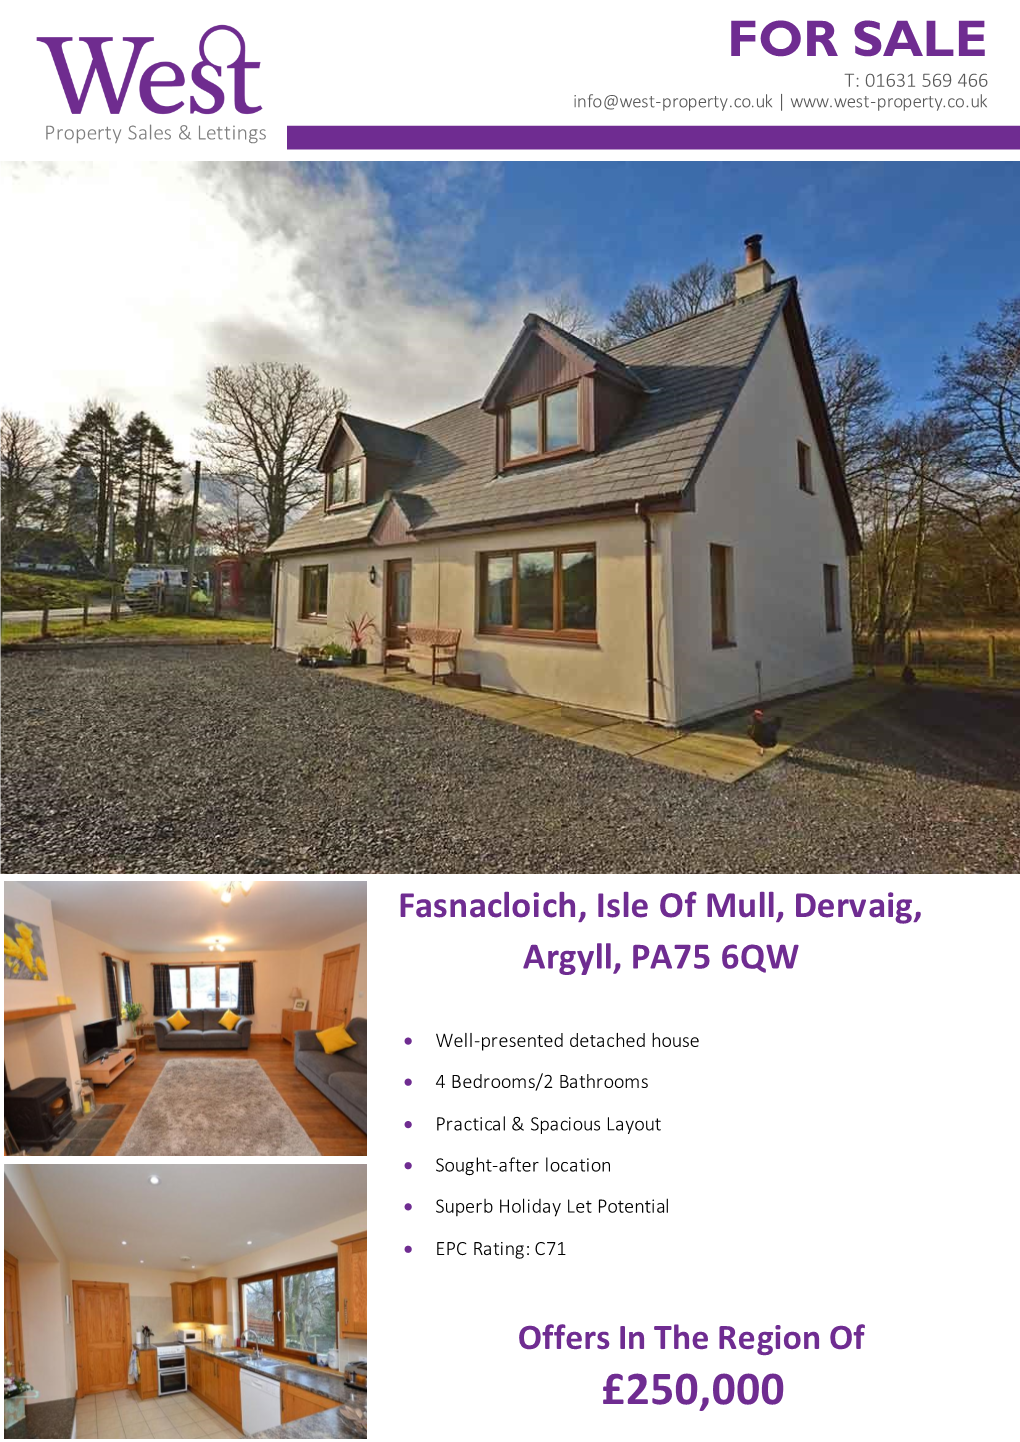 FOR SALE Fasnacloich, Isle of Mull, Dervaig, Argyll, PA75